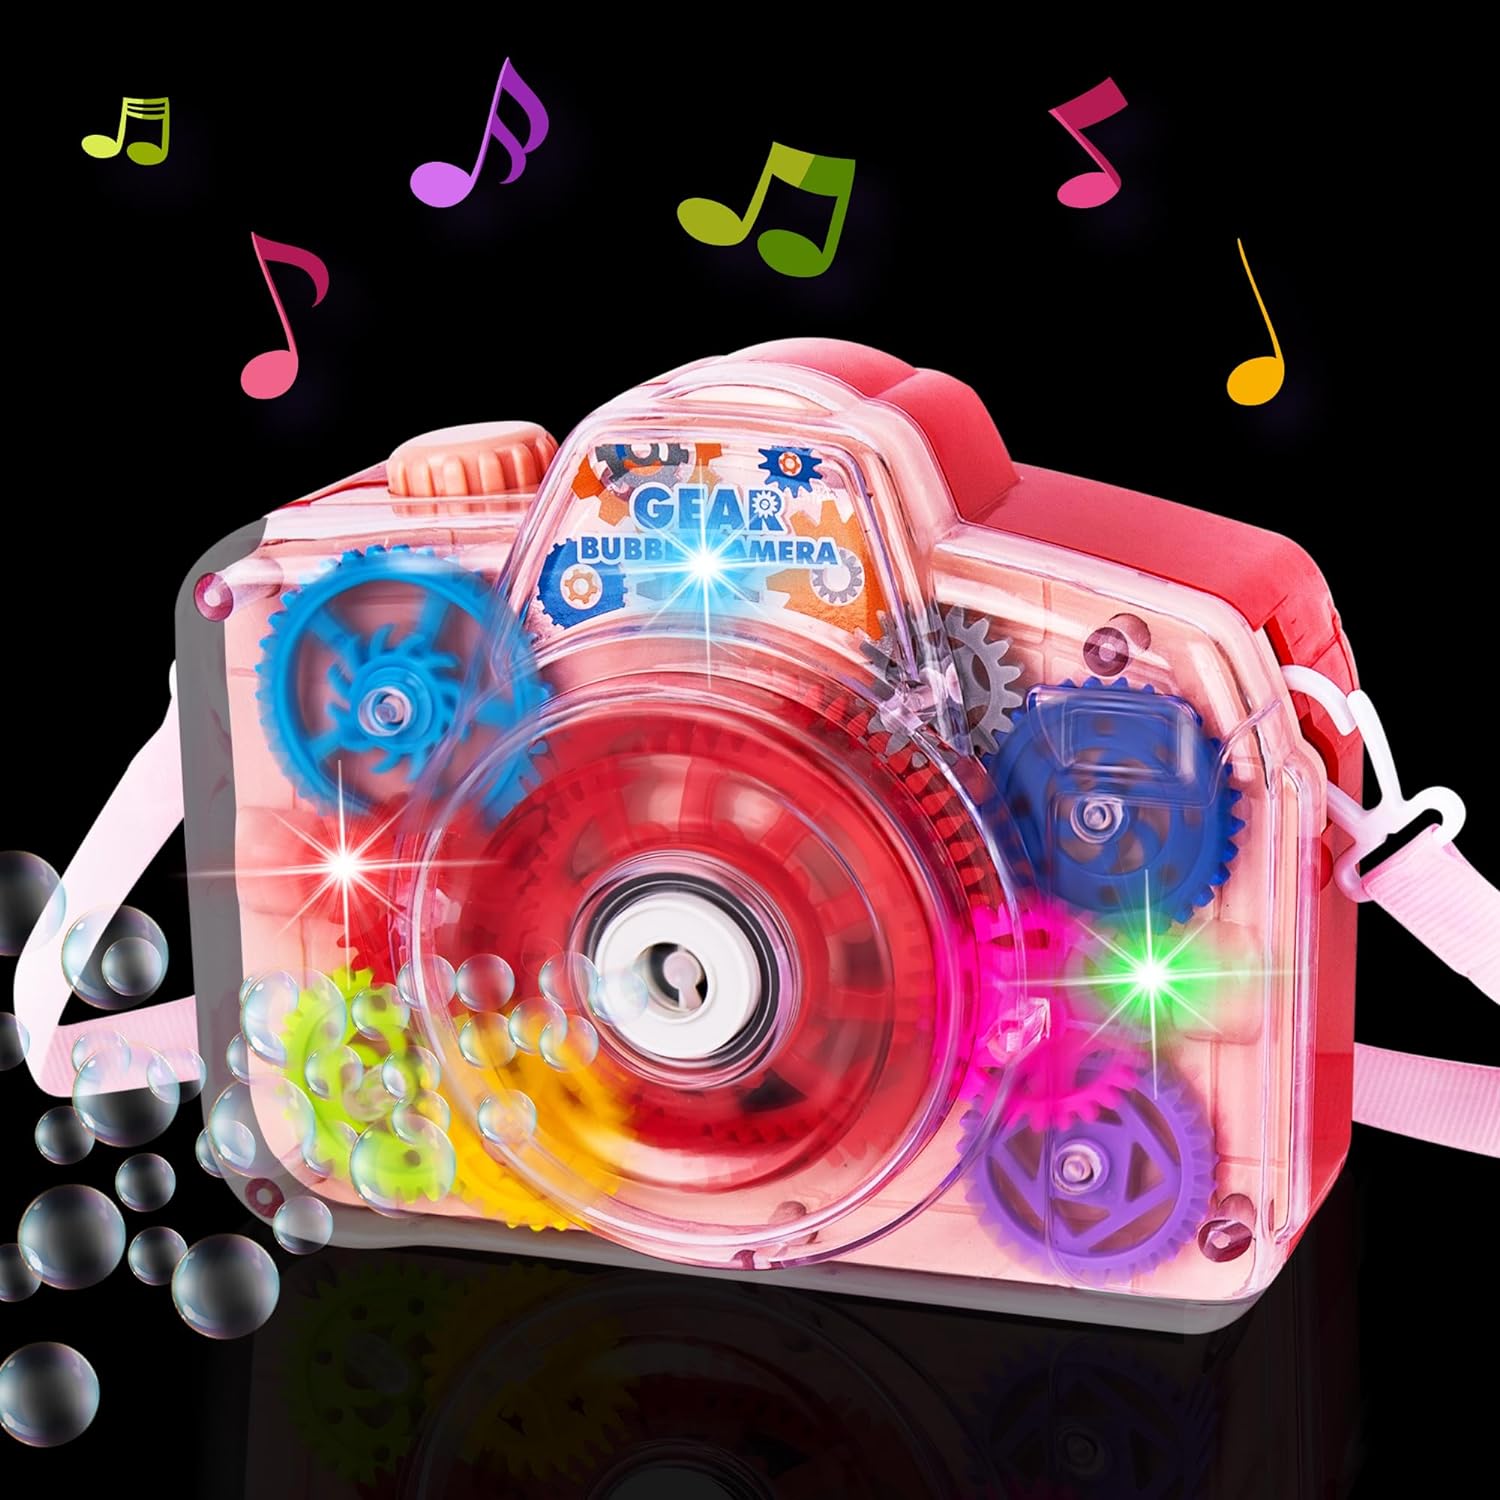 ArtCreativity Bubble Camera Gear Toy, Toy Camera Bubble Machine with 9 Moving Gears, Neck, and Bubble Solution - Small Bubble Machine with Music and Lights for Extra Fun, Cute Bubble Makers for Kids